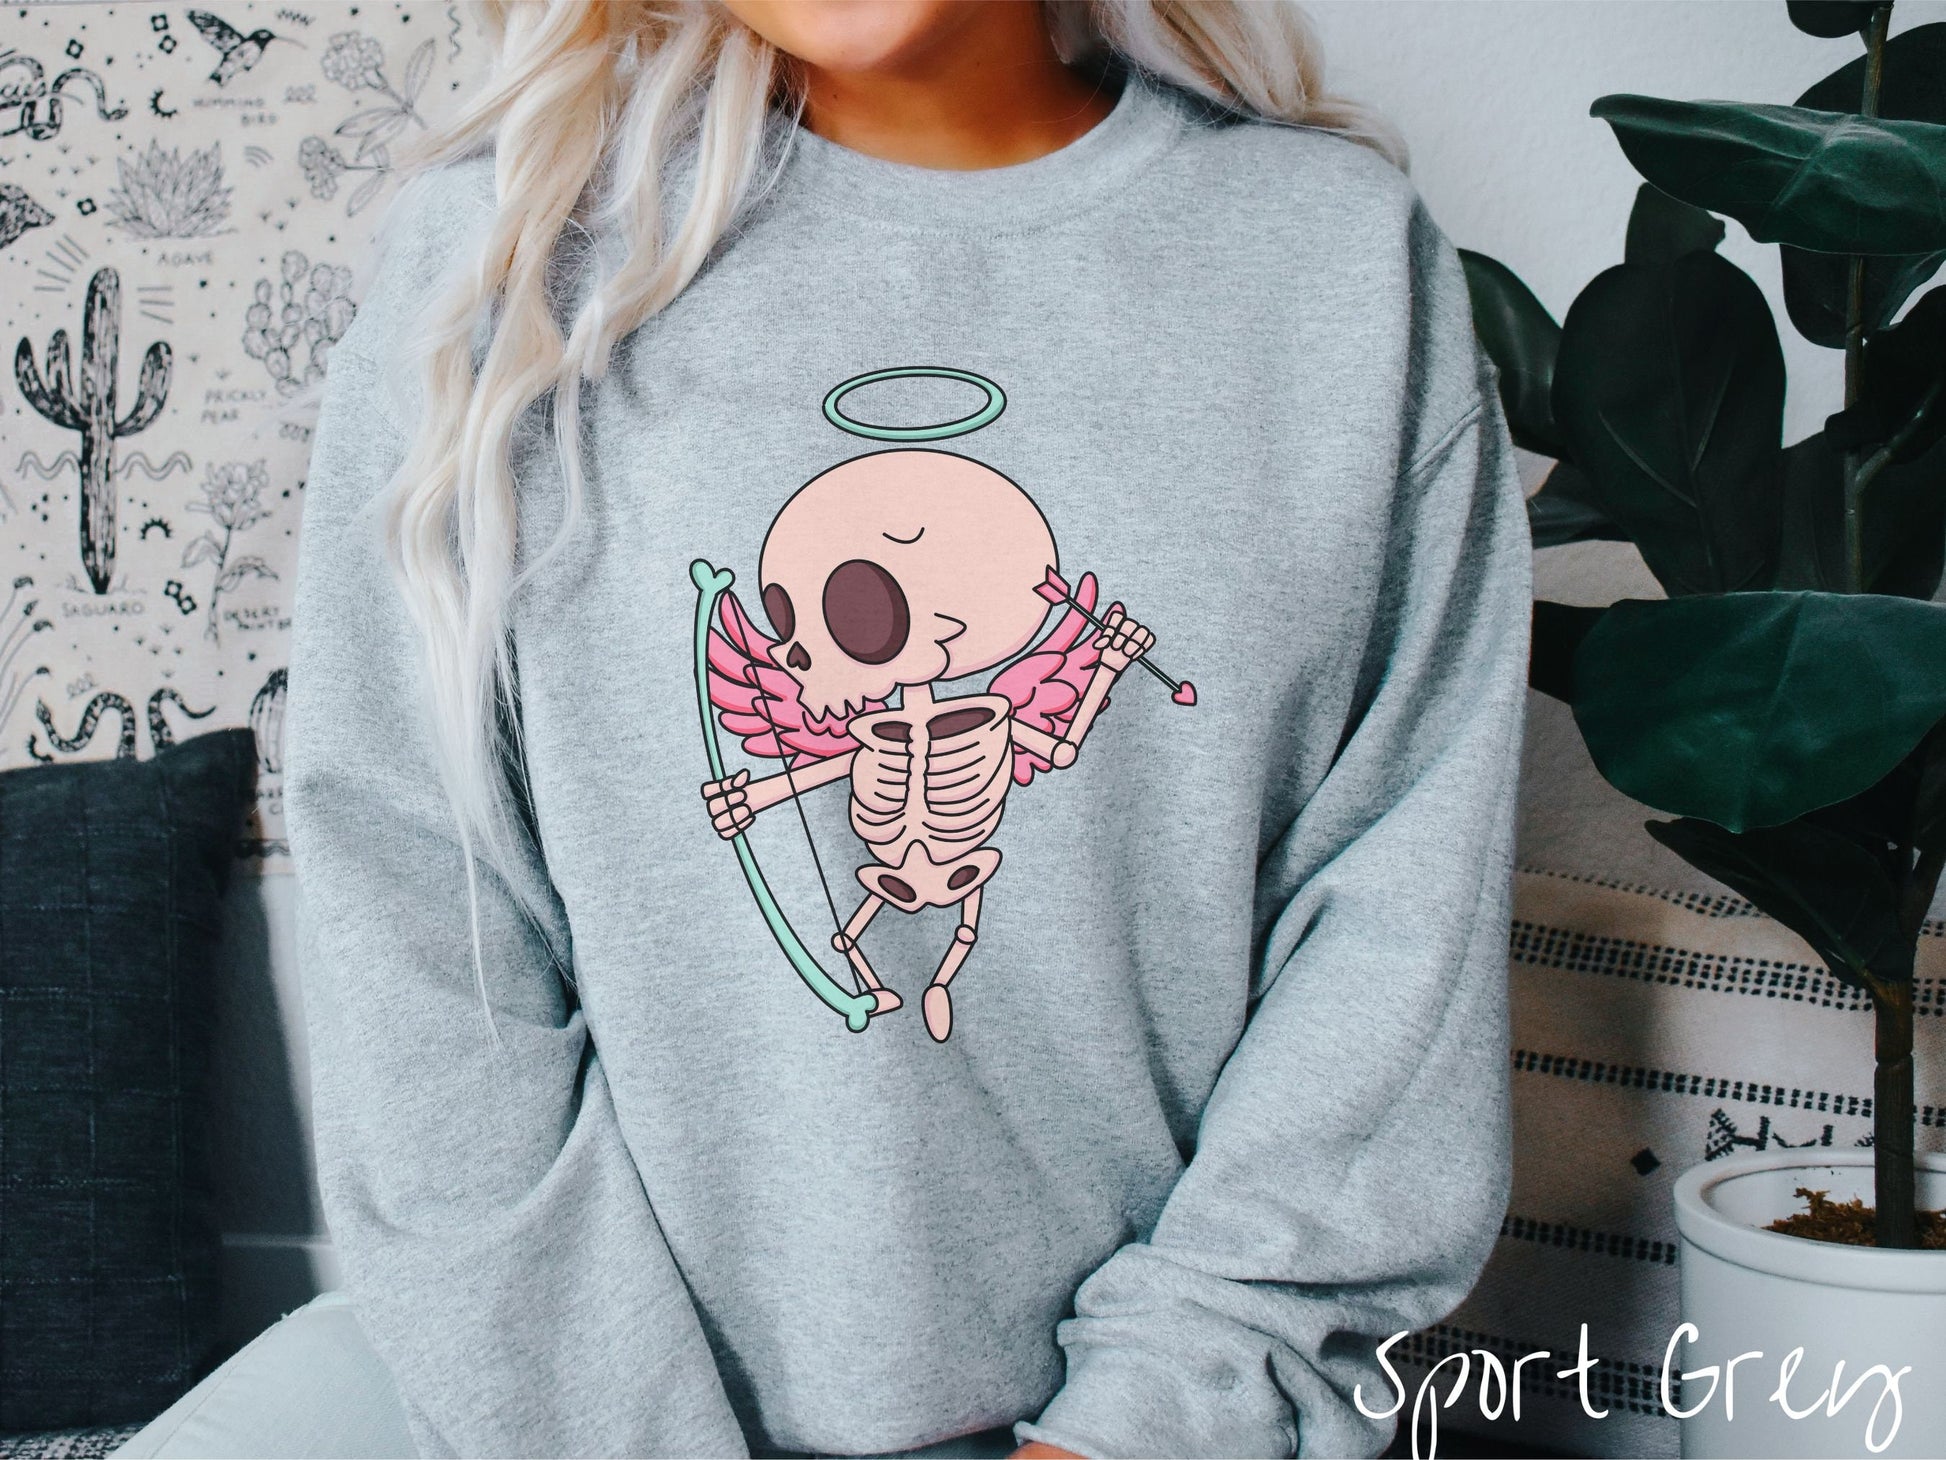 A woman wearing a cute sport grey colored sweatshirt with a pink winged baby skeleton cupid with a halo holding a heart-tipped arrow in its left hand and a bow in its right hand.